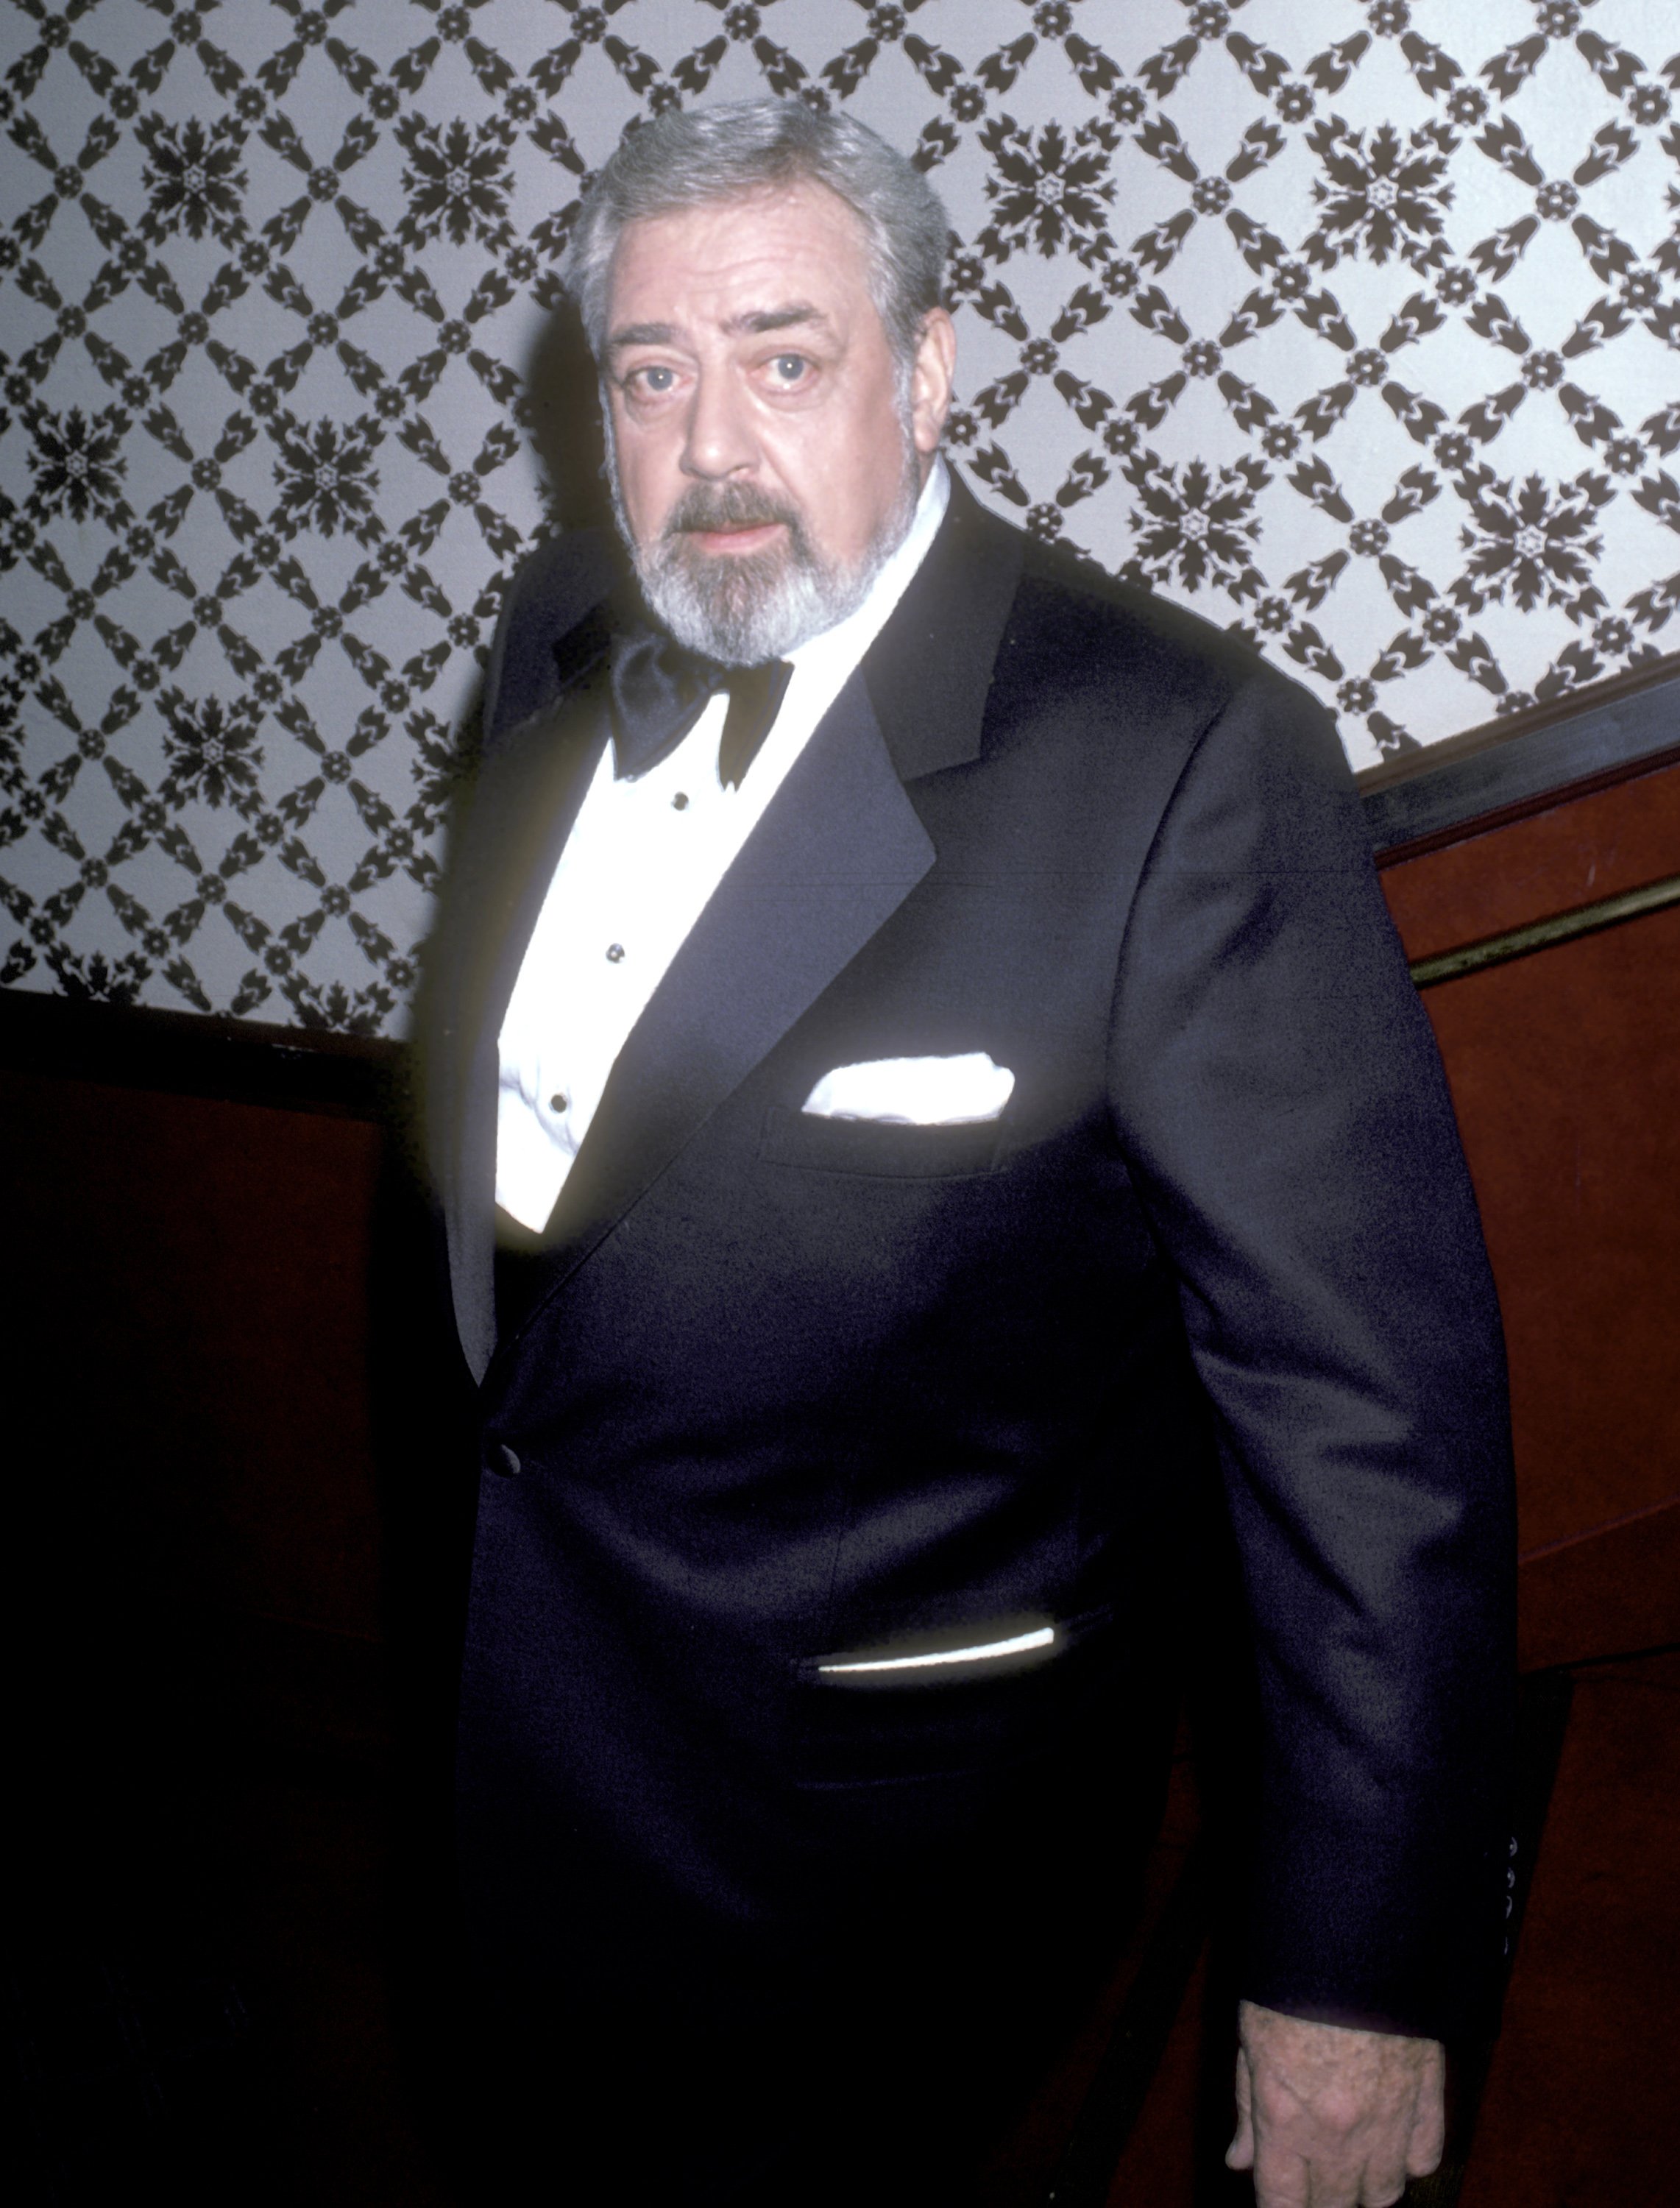 Raymond Burr attends the 13th Annual International Emmy Awards at the Sheraton Centre Hotel on November 25, 1985 in New York City ┃Source: Getty Images